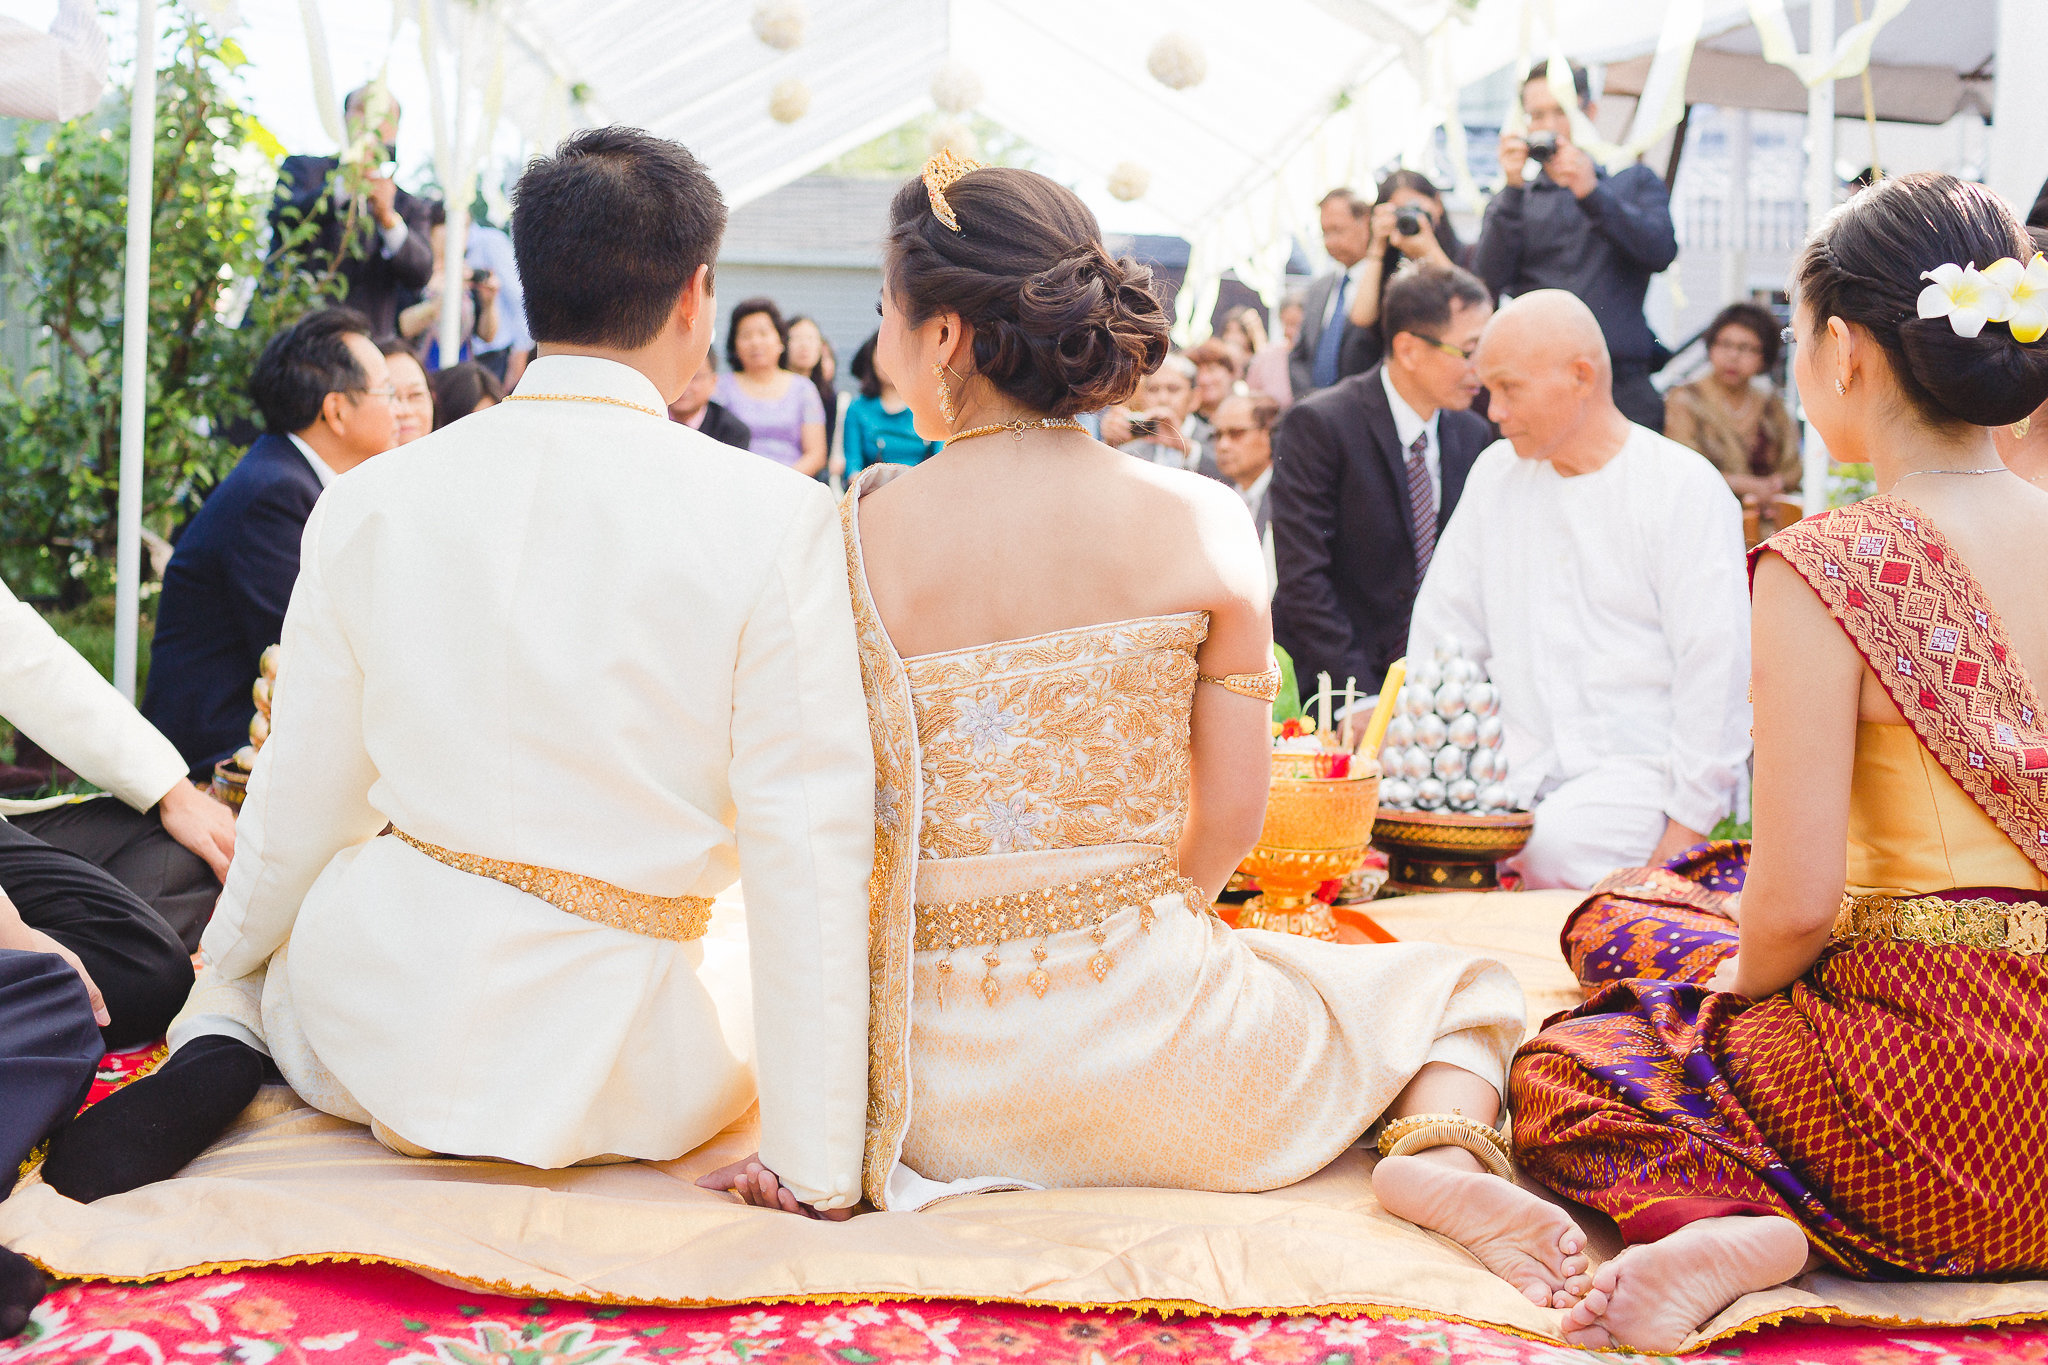 photographe-montreal-mariage-culturel-traditionnel-cambodgien-lisa-renault-photographie-traditional-cultural-cambodian-wedding-23